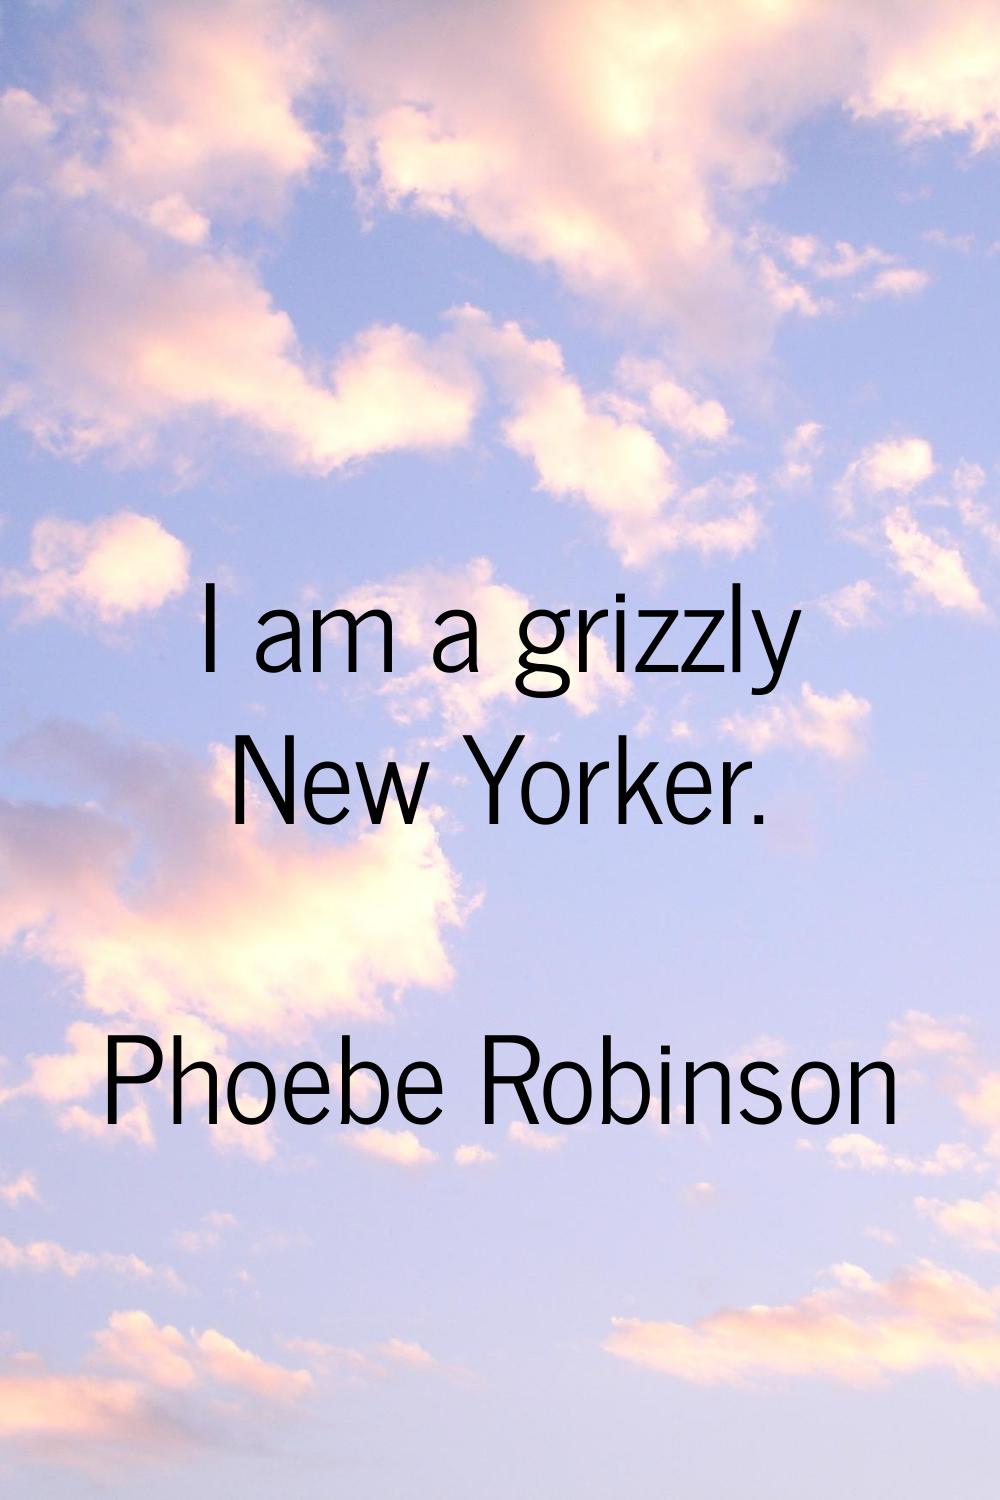 I am a grizzly New Yorker.